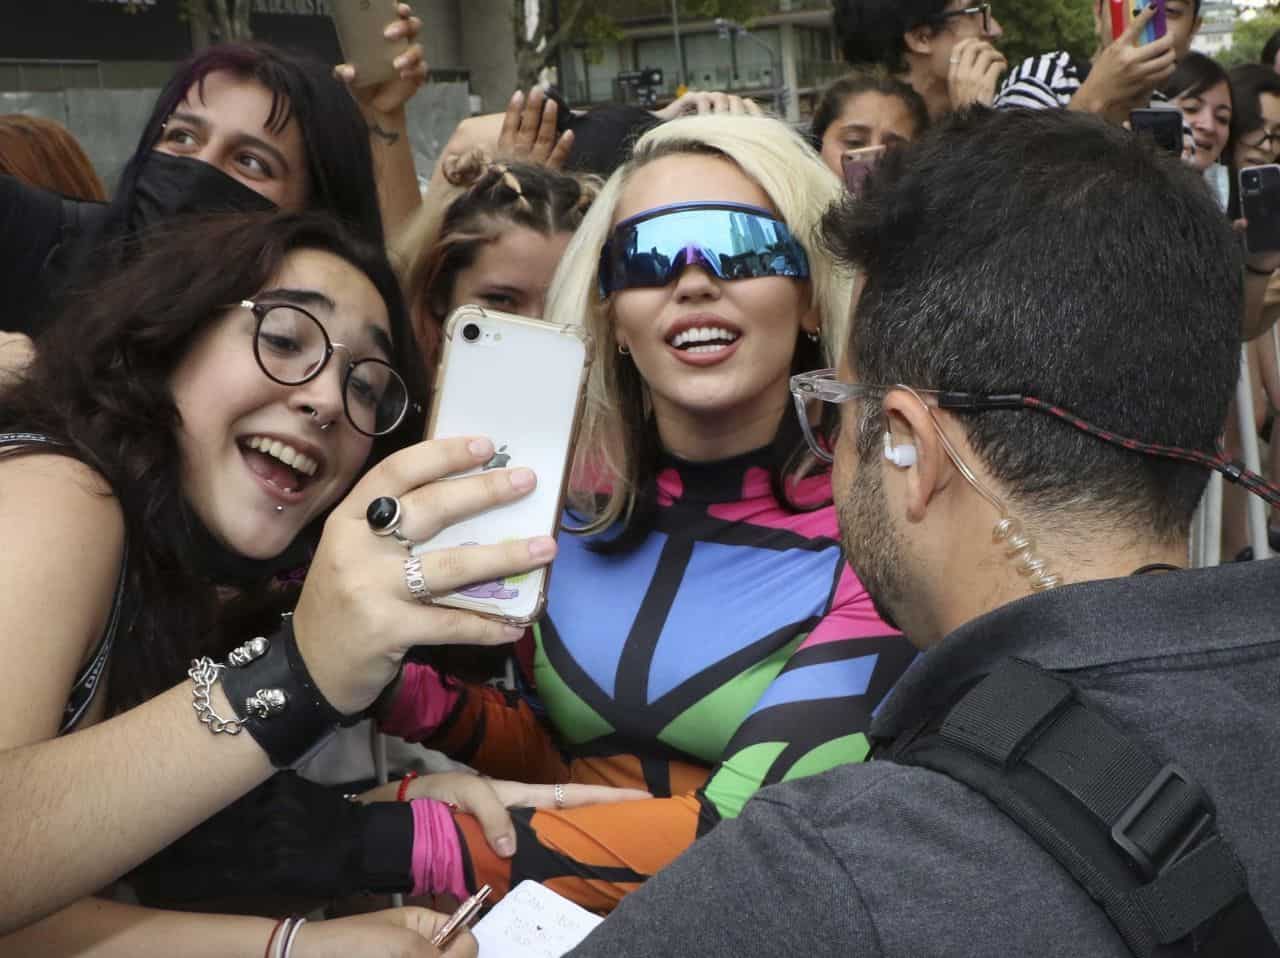 Miley Cyrus Looks Fantastic in a Bodysuit as She Greets Fans in Argentina